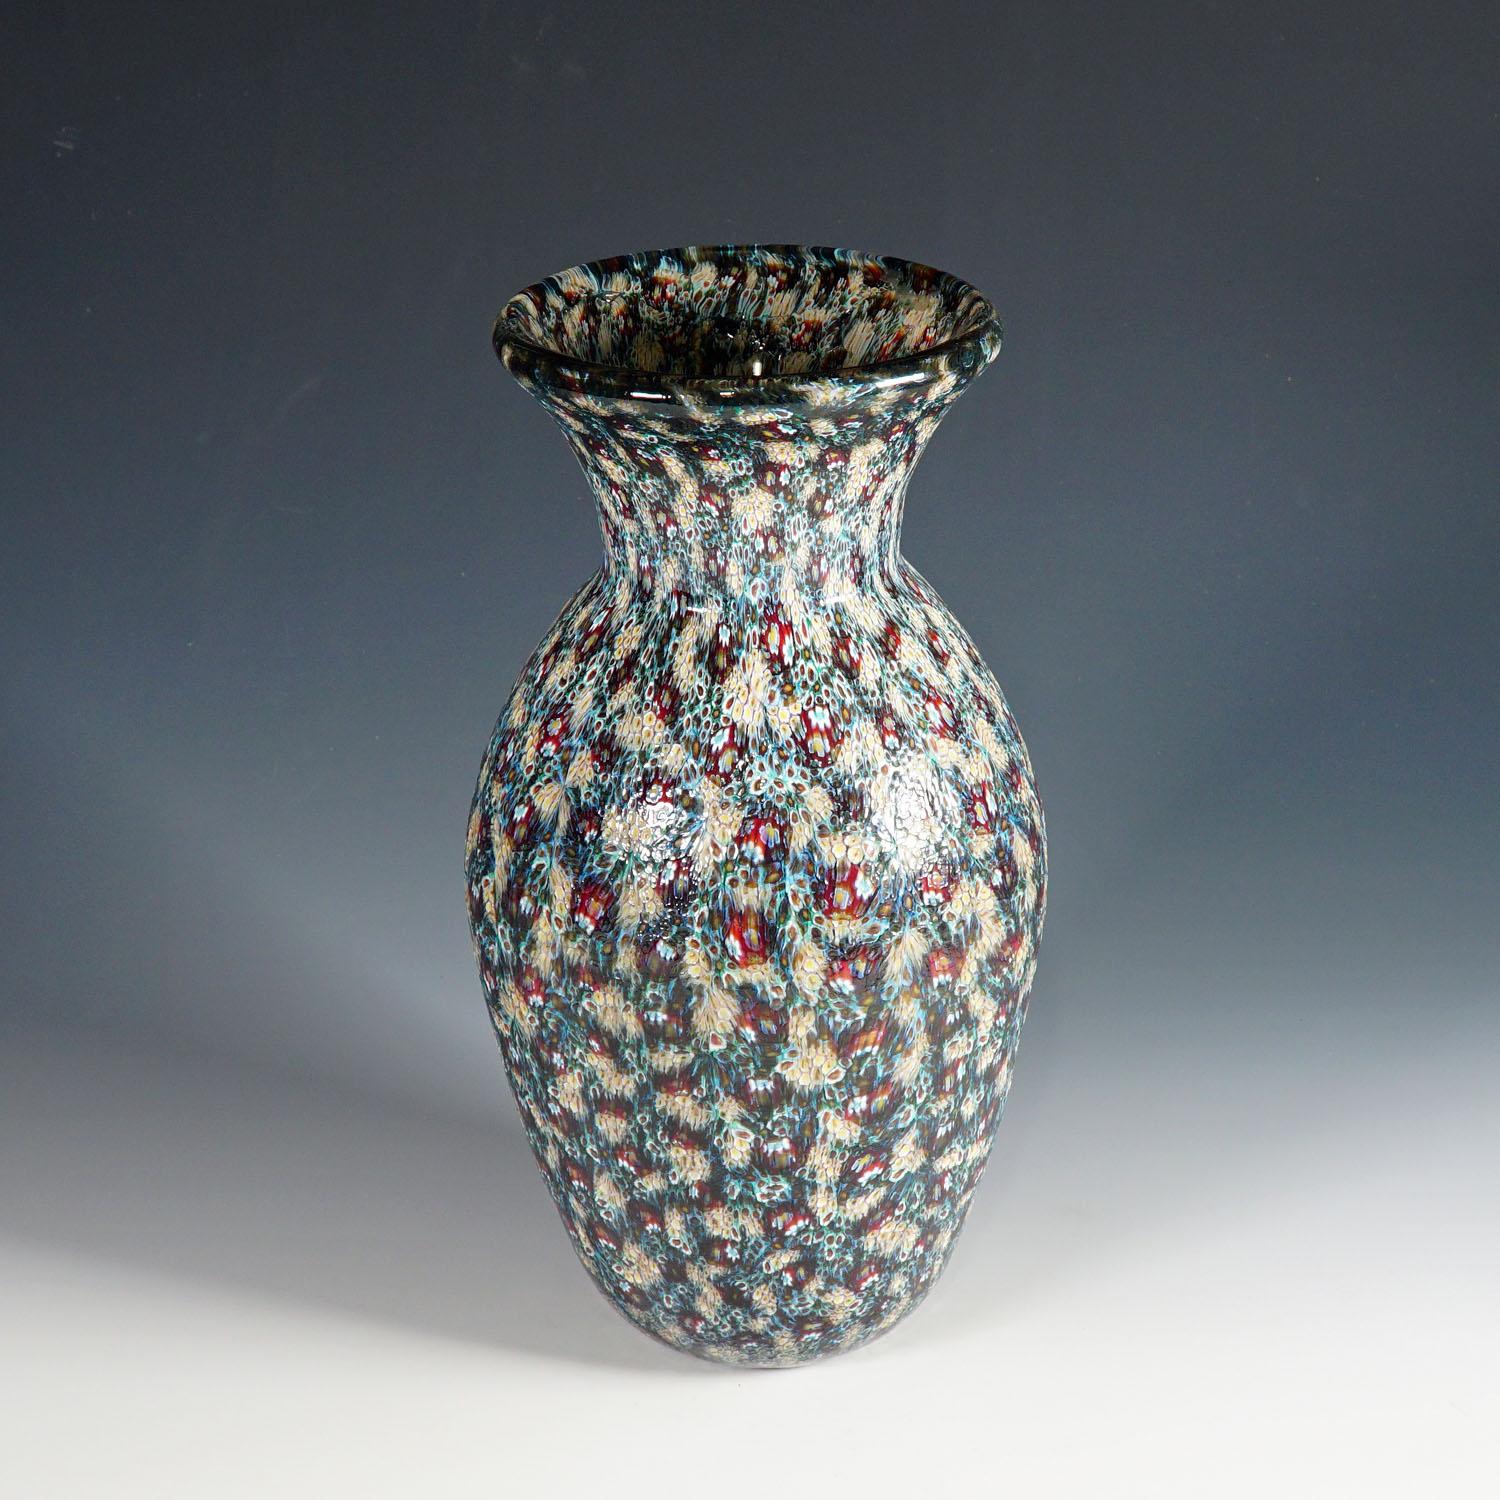 A Mid-Century Modern murrine art glass vase designed and executed by Vittorio Ferro Murano, Italy circa 2000s. This authentic vintage Italian art glass vase features small murrines in multicoloured opaque glass.

Measures: height: 12.6